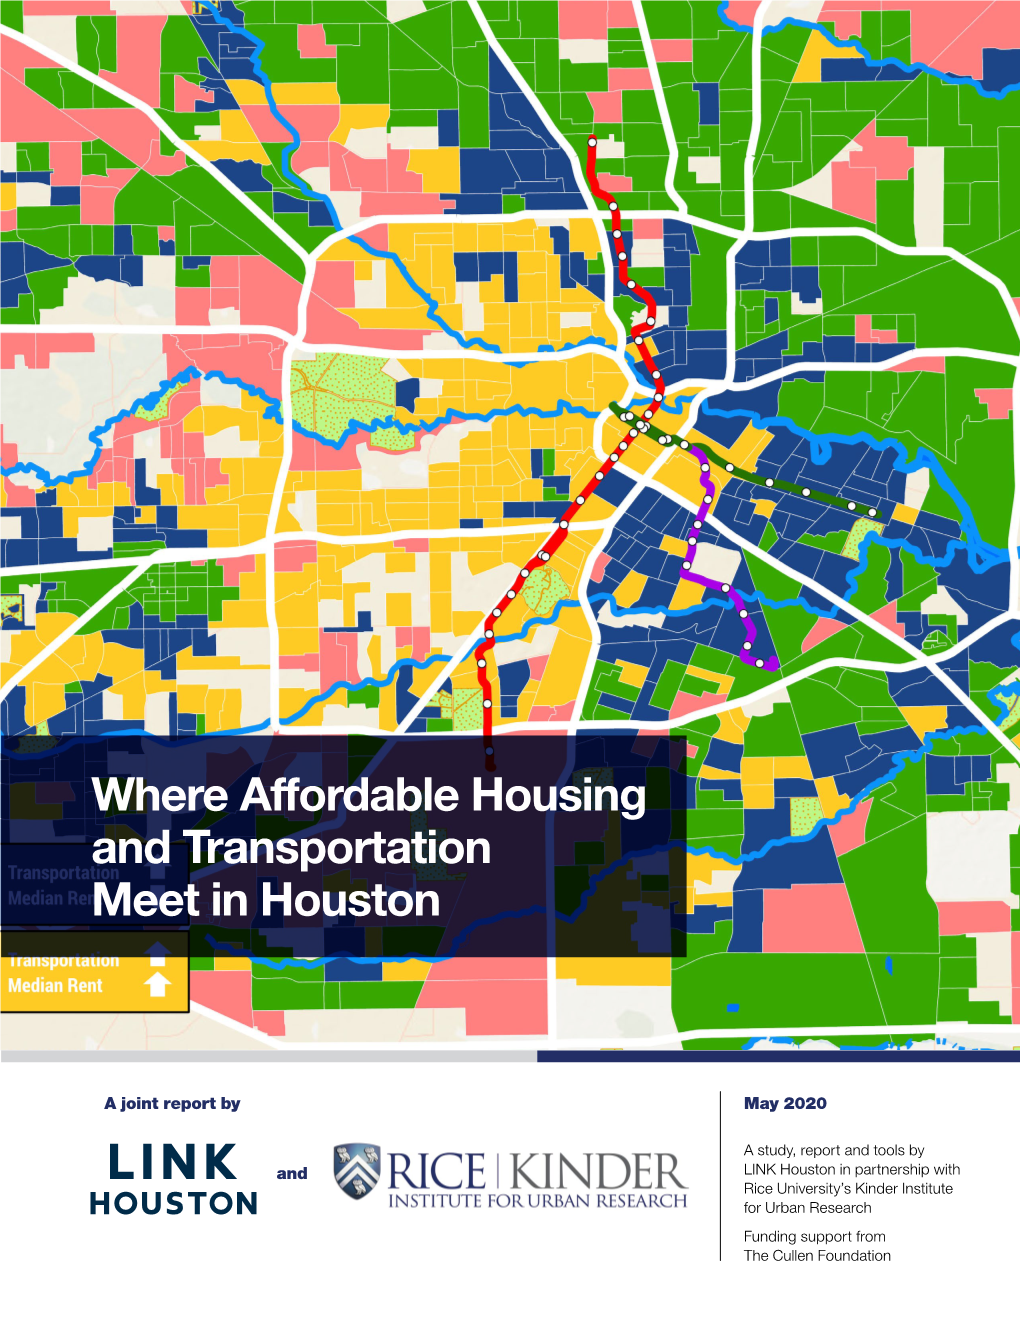 Where Affordable Housing and Transportation Meet in Houston